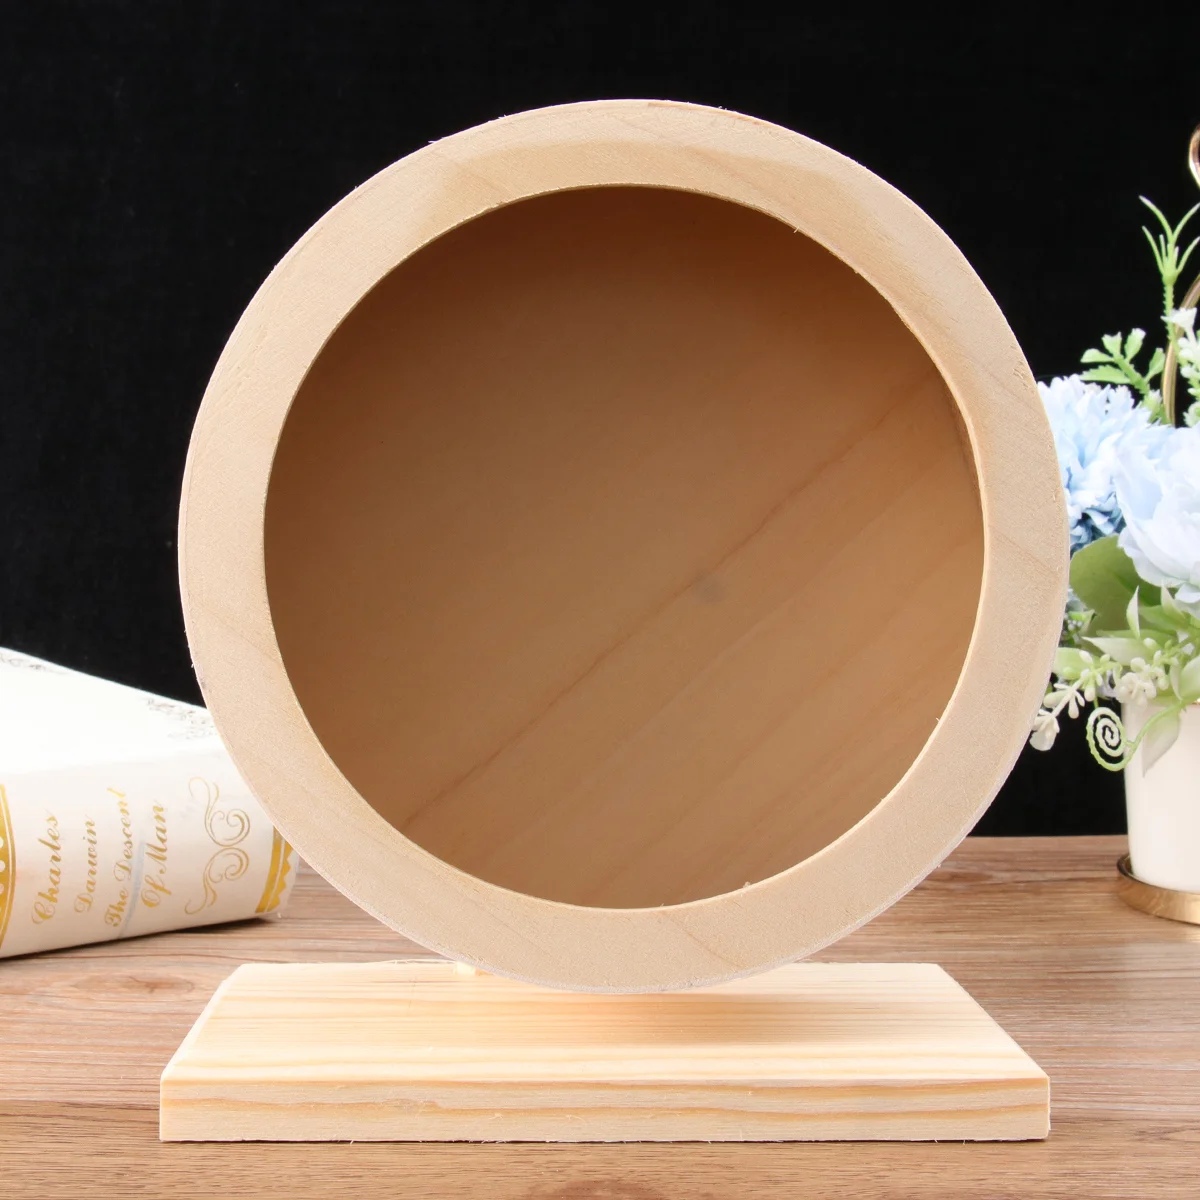 

Small Pets Exercise Wheel Hamster Wooden Mute Running Wheel Play Rest Nest for Rat Gerbil Mice Chinchillas Hedgehogs Guinea Pigs